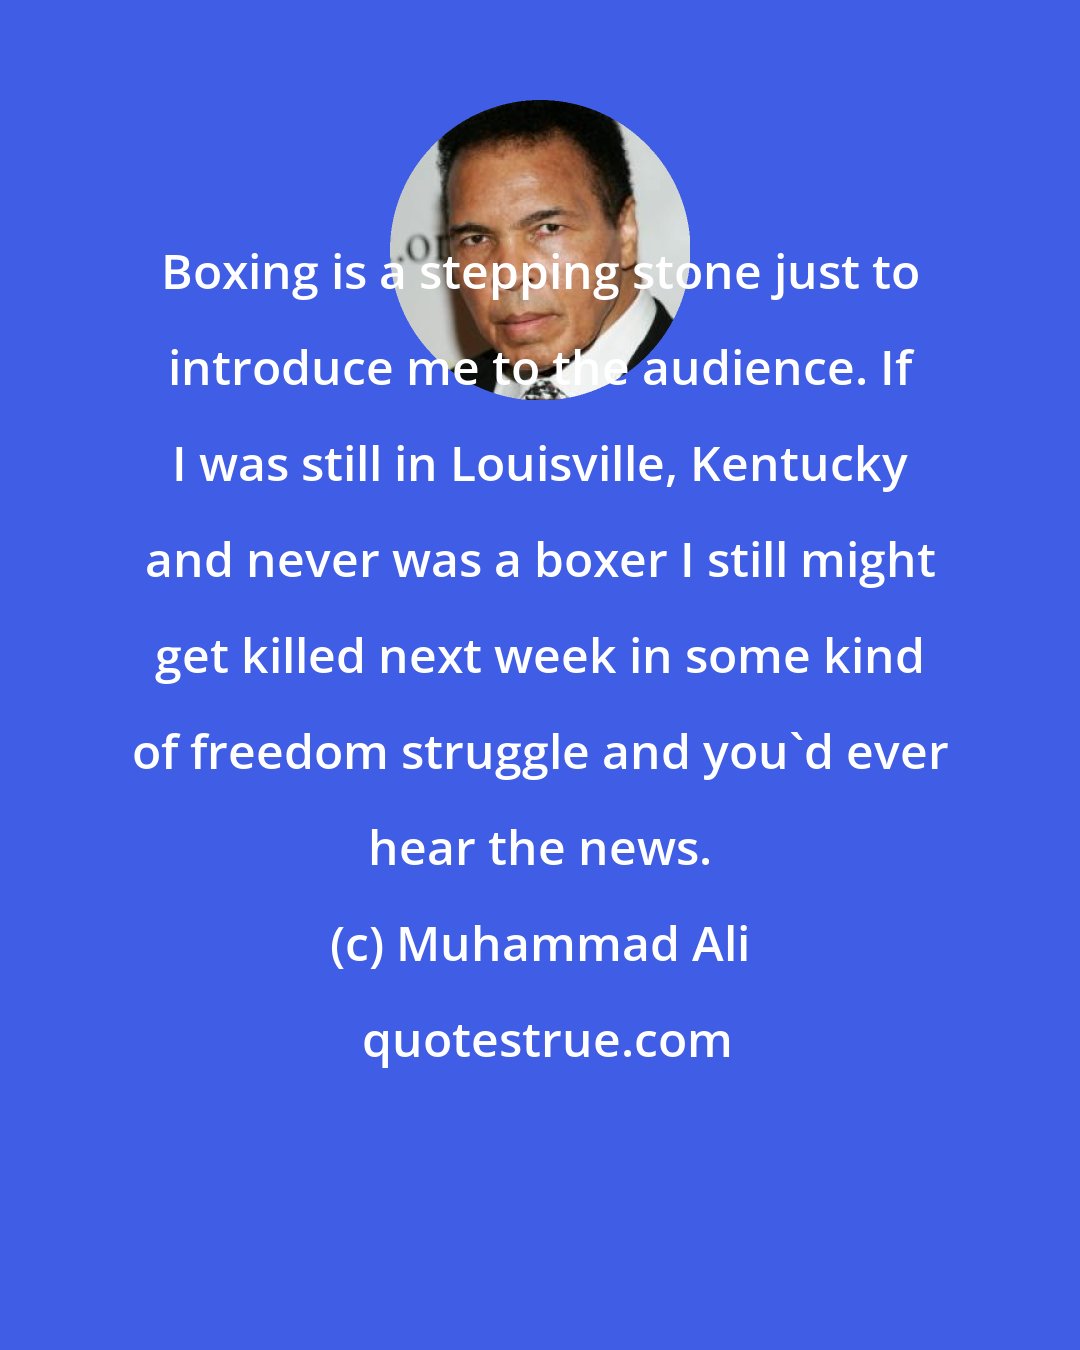 Muhammad Ali: Boxing is a stepping stone just to introduce me to the audience. If I was still in Louisville, Kentucky and never was a boxer I still might get killed next week in some kind of freedom struggle and you'd ever hear the news.